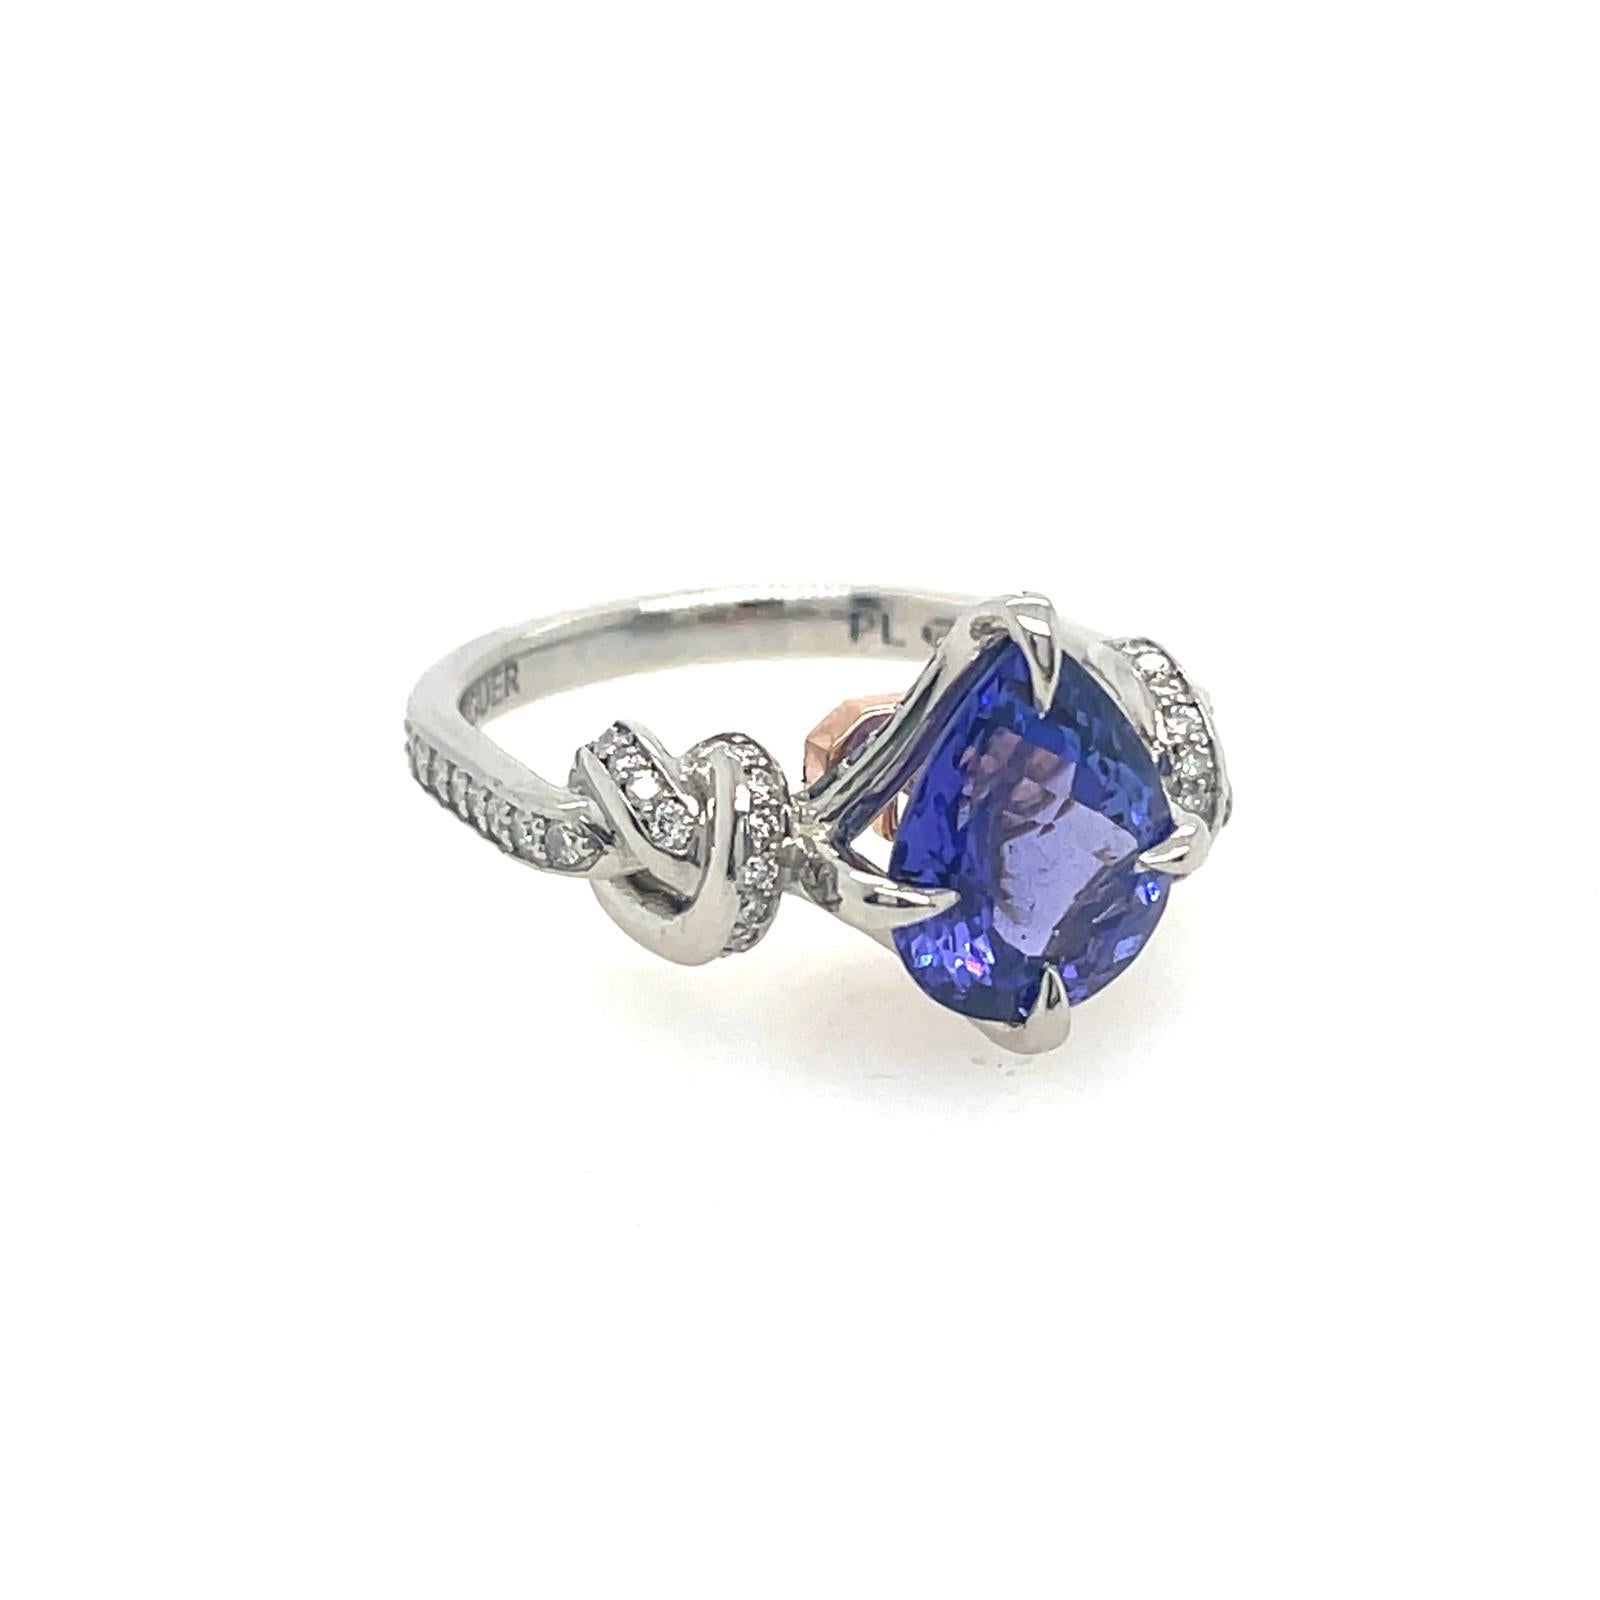 For Sale:  2ct tanzanite and diamond ring in platinum and rose gold  Forget me knot ring  5